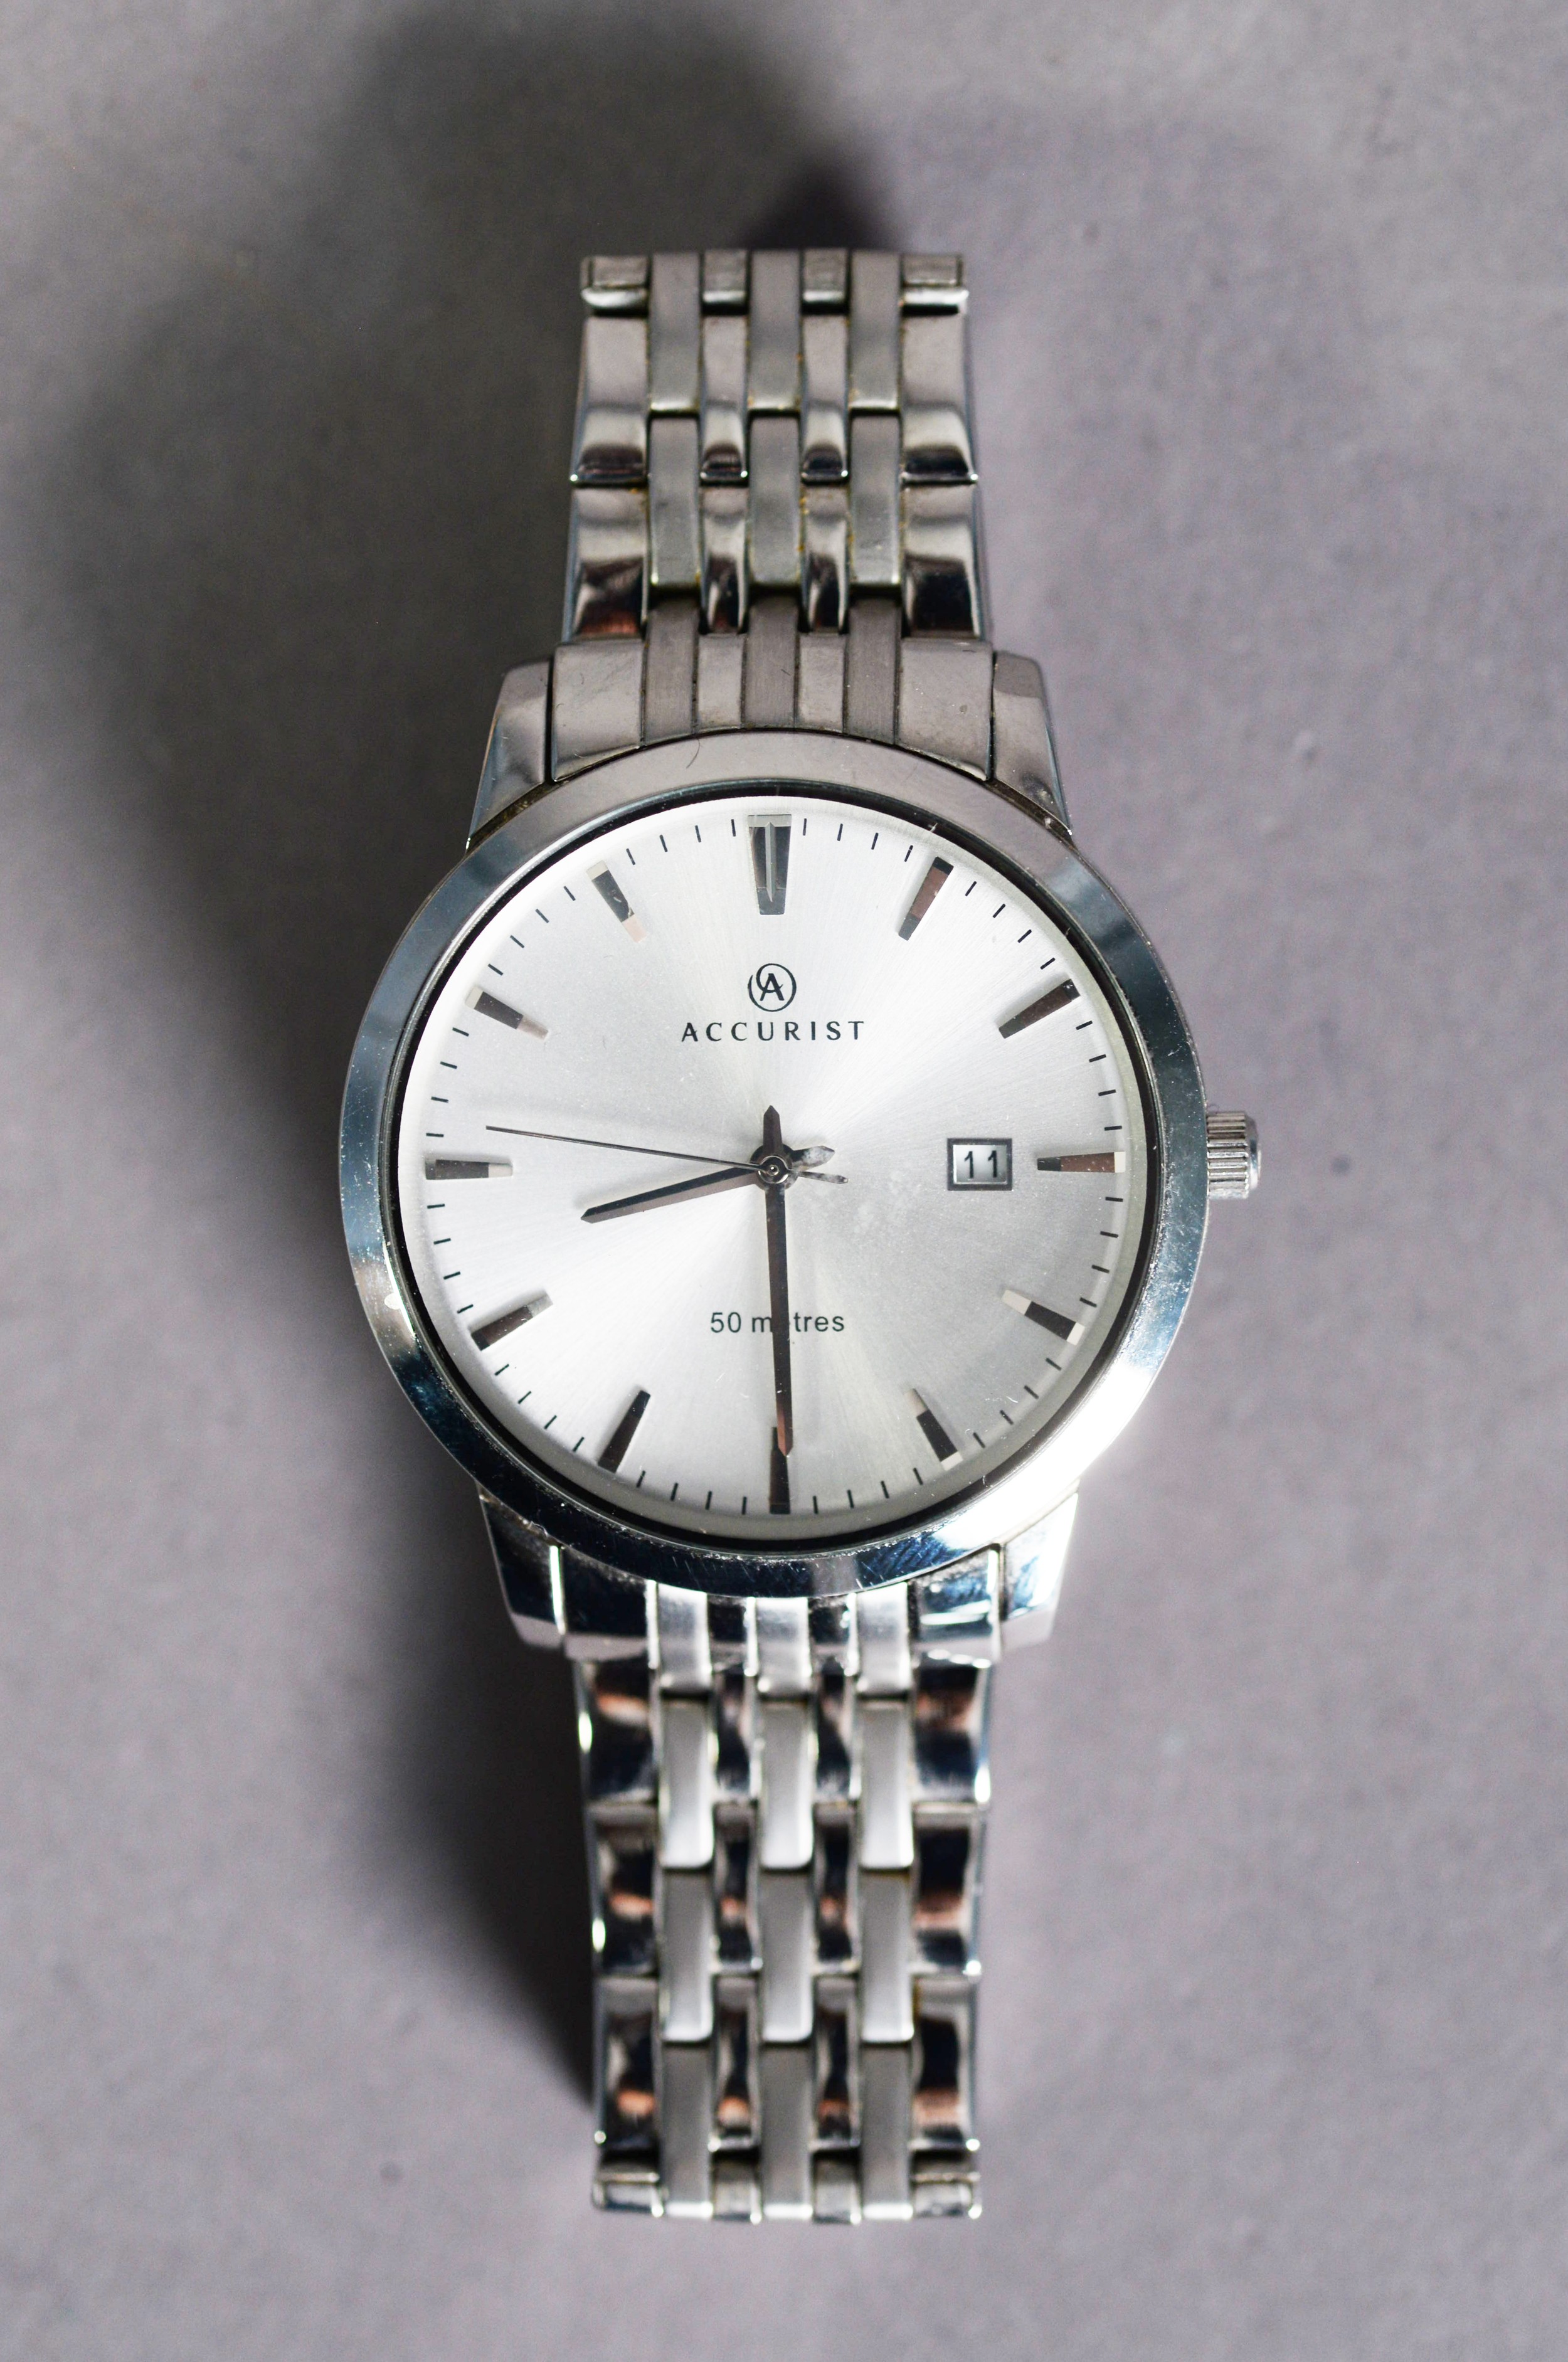 GENT'S ACCURIST QUARTZ ALL STAINLESS STEEL WRISTWATCH, water resistant to 50 metres, having silvered